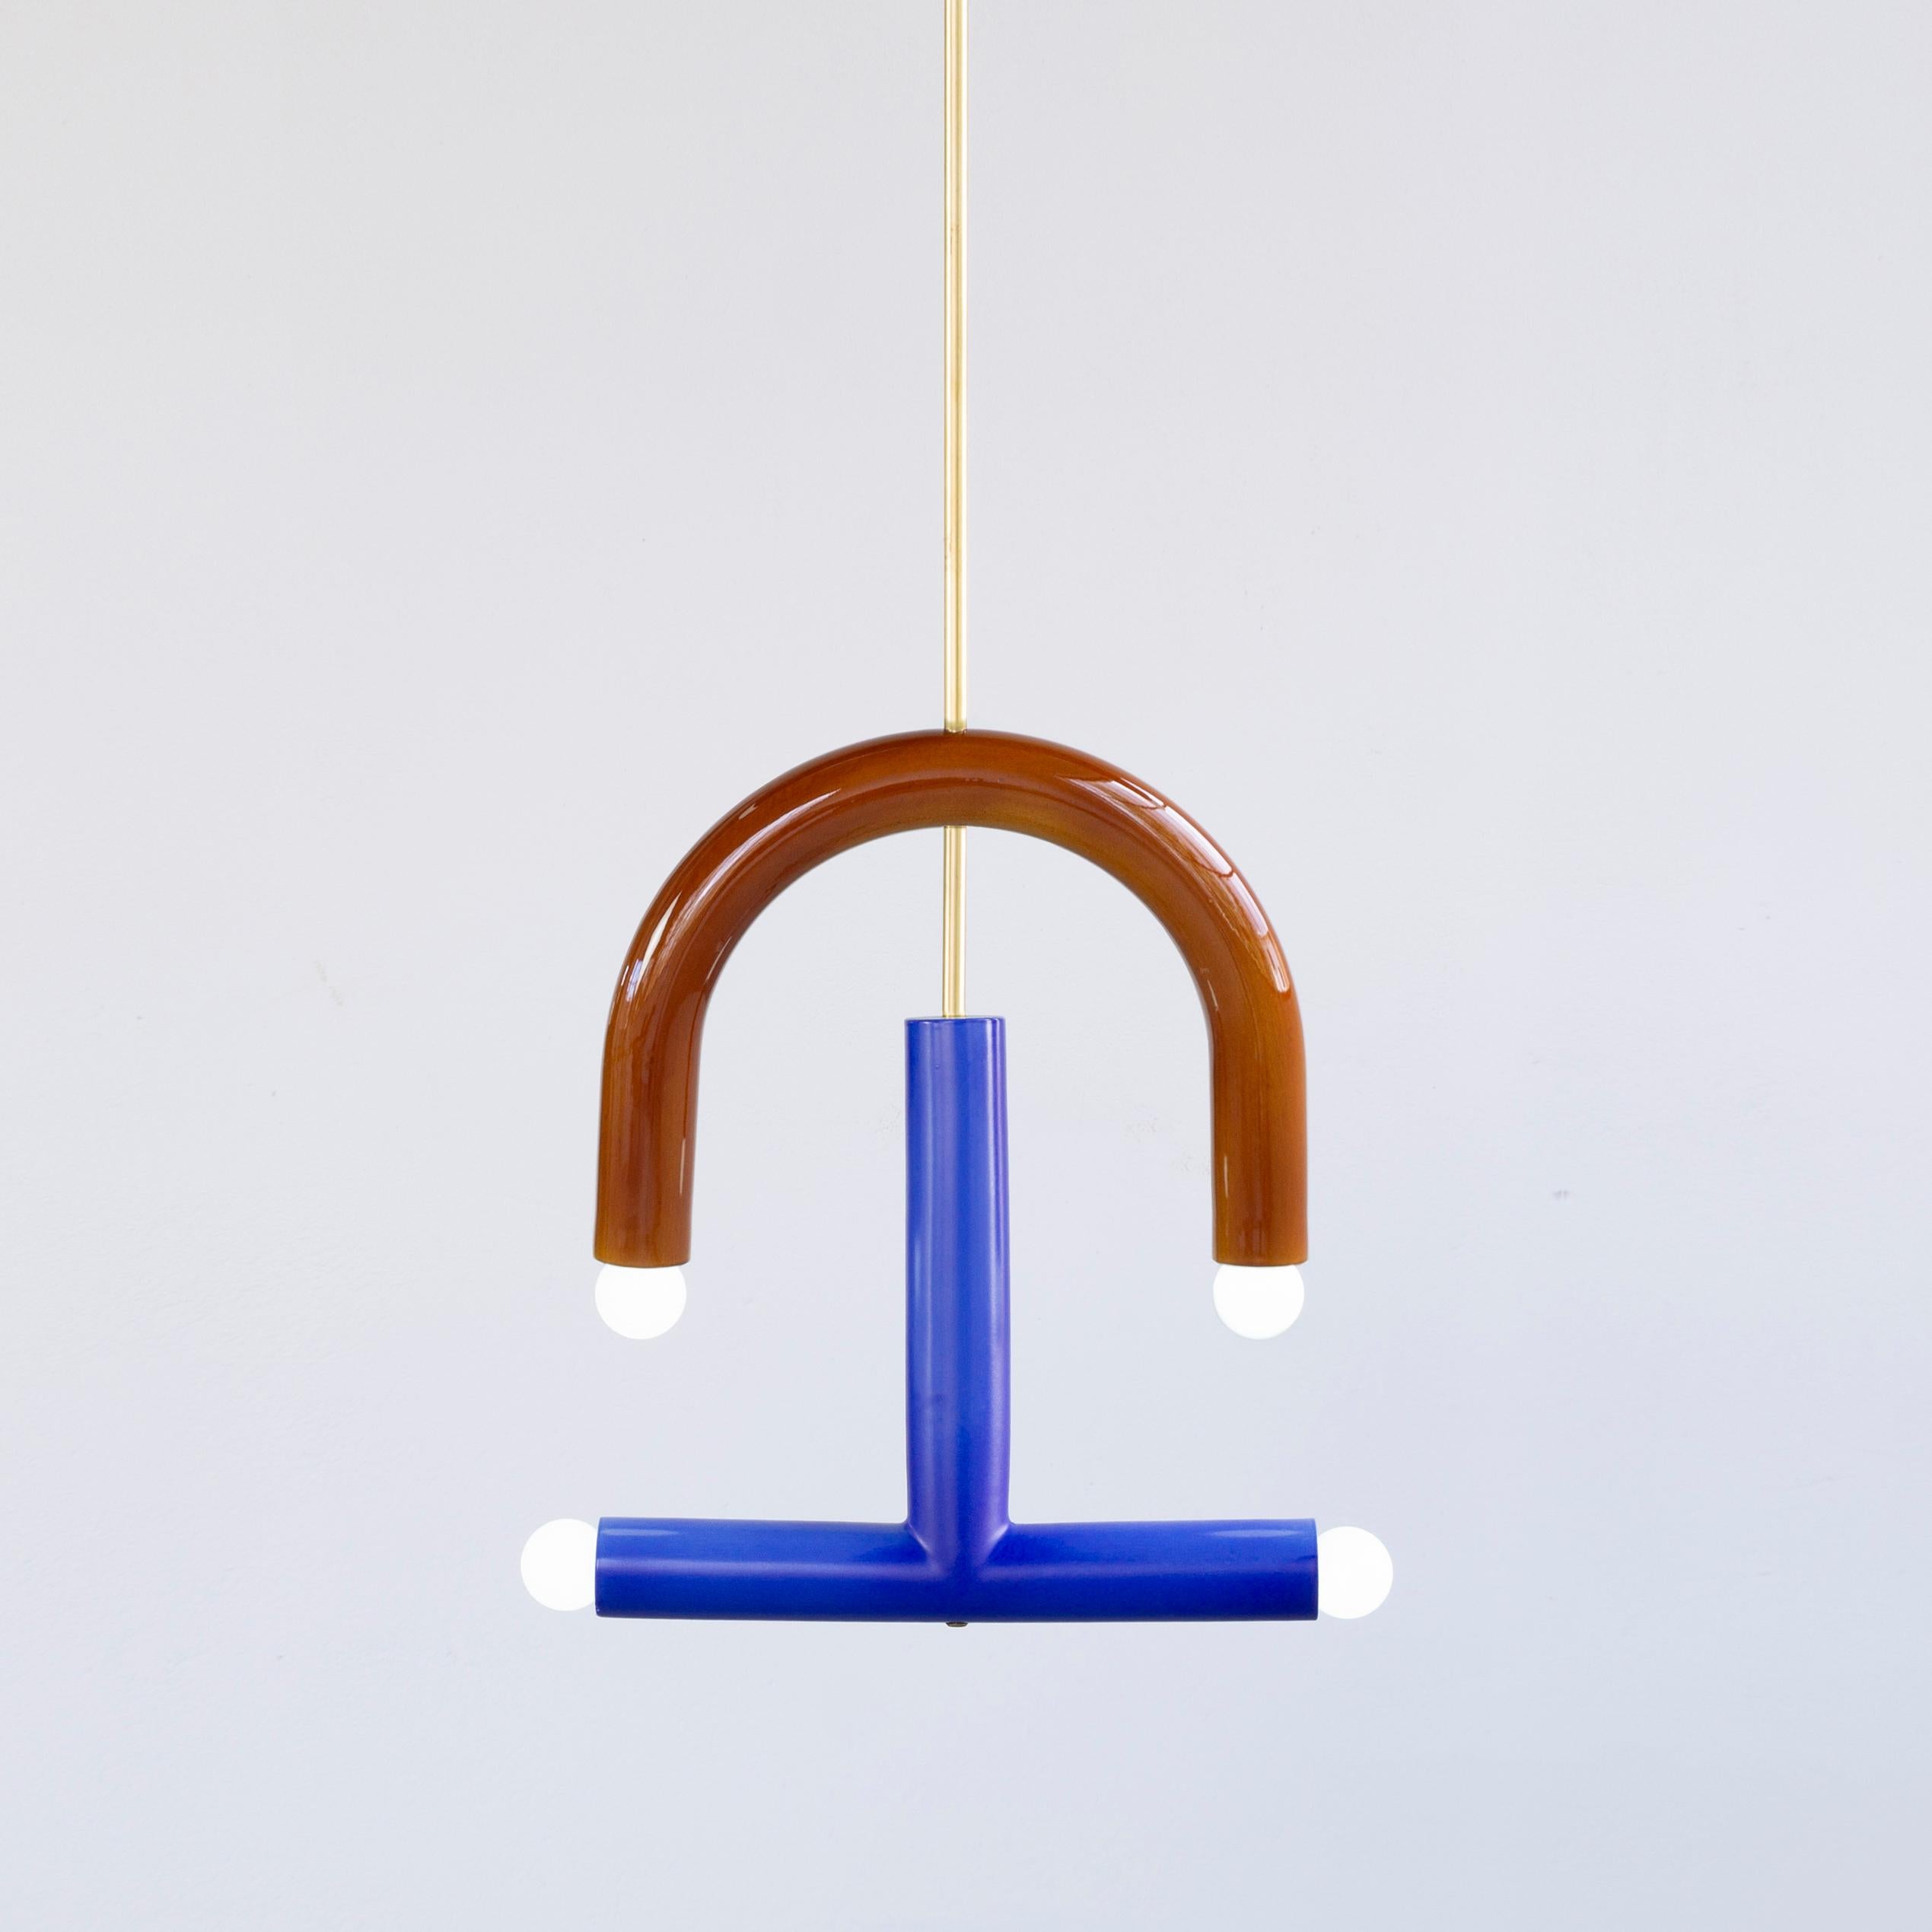 TRN C3 pendant lamp II by Pani Jurek
Dimensions: D 5 x W 35 x H 40 cm 
Material: Hand glazed ceramic and brass.
Available in other colors.
Lamps from the TRN collection hang on a metal tube, not on a cable. This allows the lamp to be mounted in a